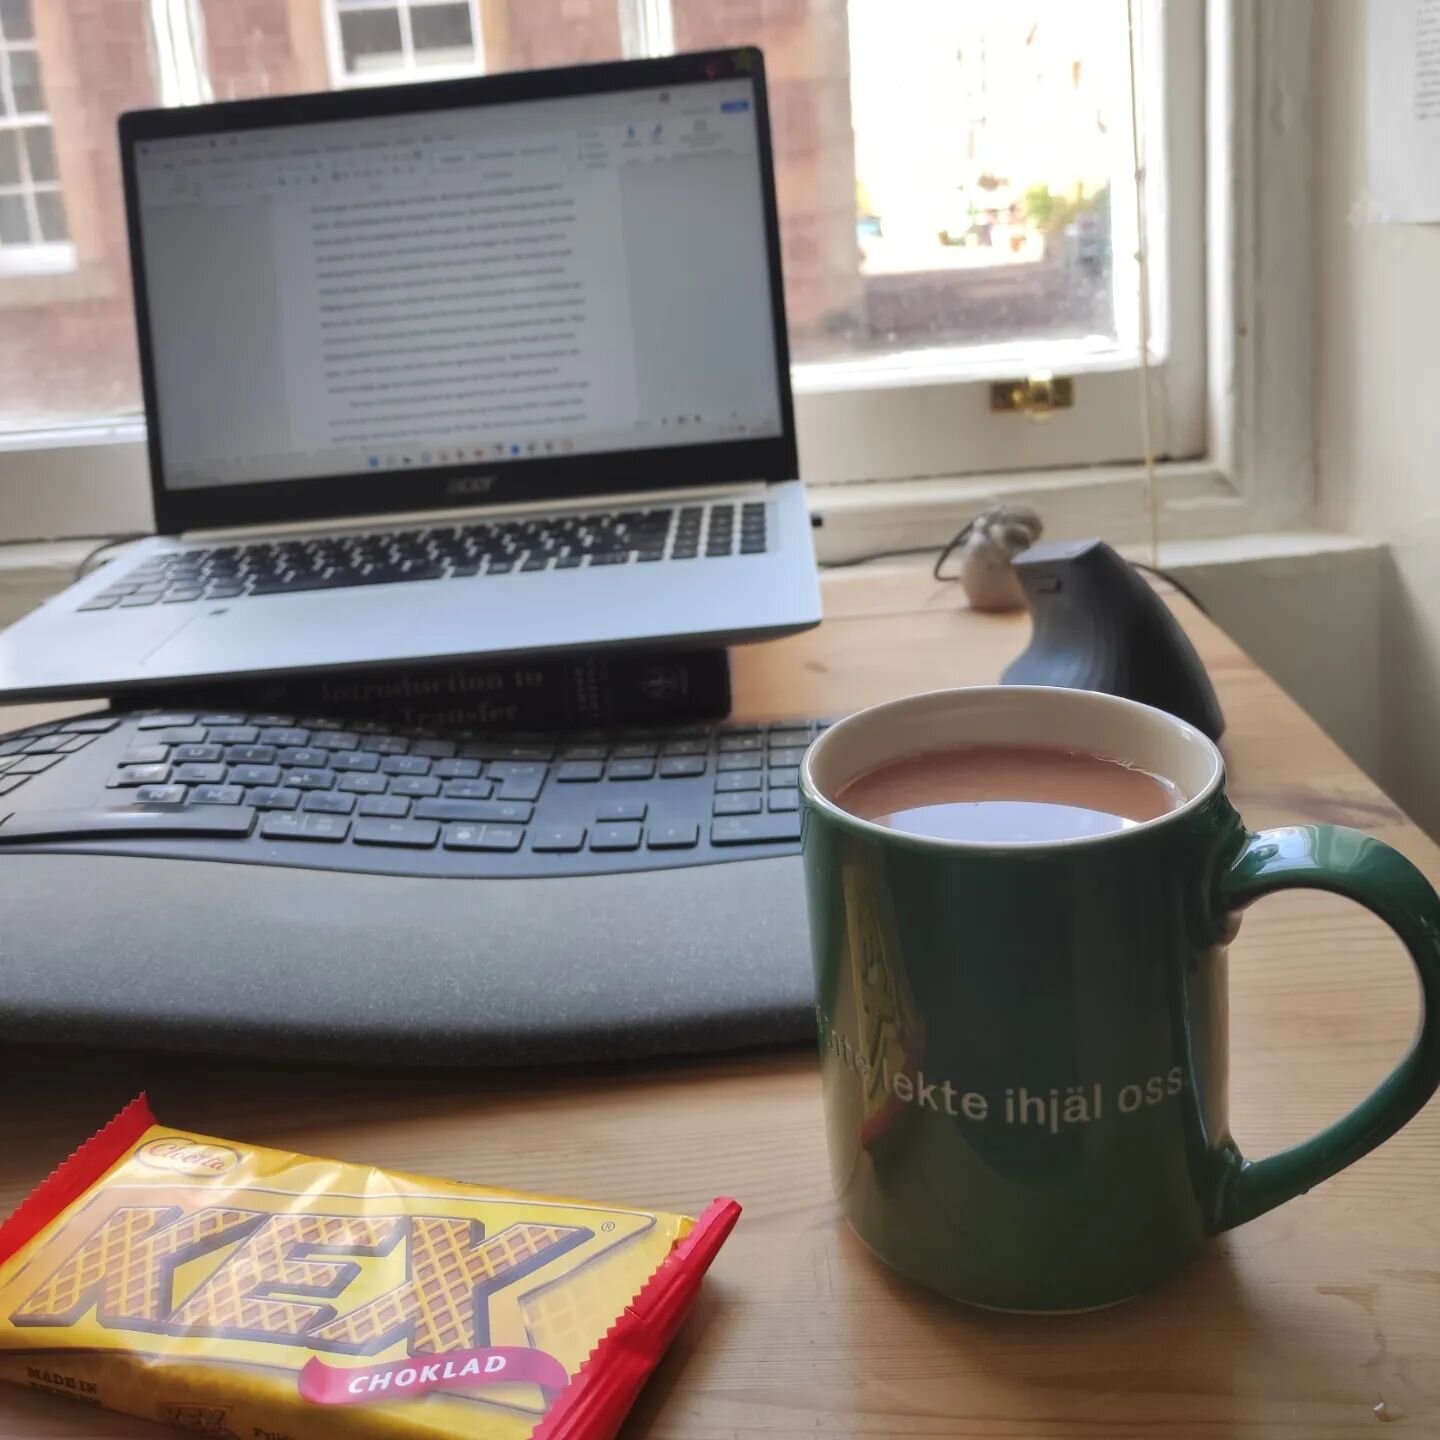 All the help I can get for finishing off a first draft of the 10.000 words I need to hand in for my second year review. 
Got this mug at the Astrid Lindgren museum a couple of years ago, and bring it out for important writing sessions. Also featured: